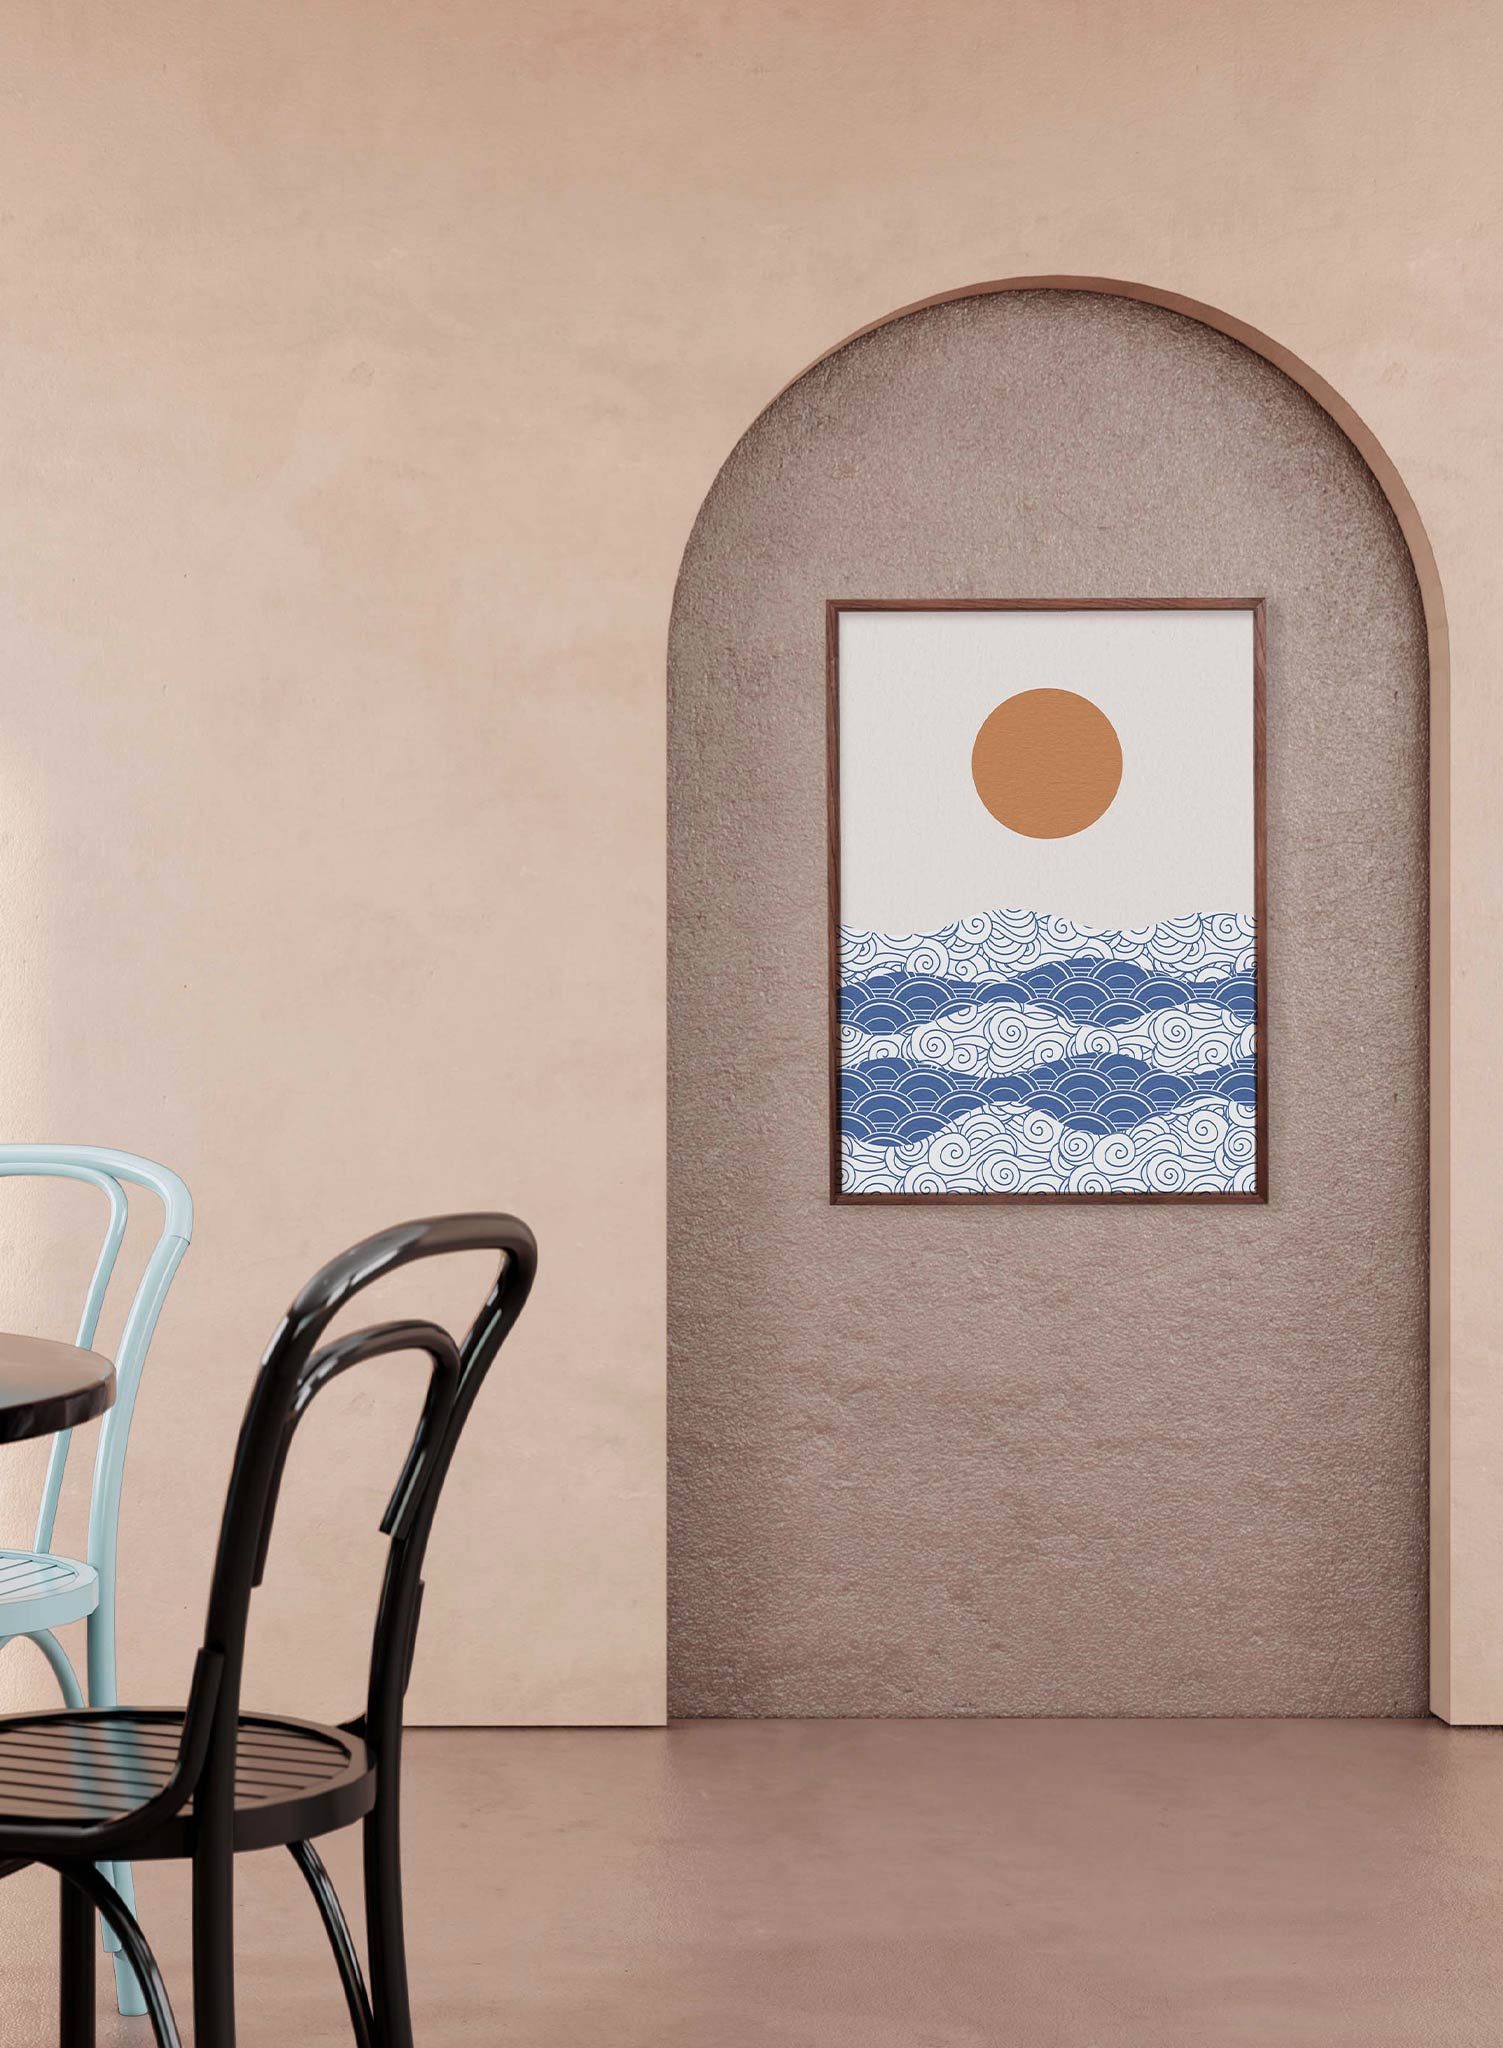 Land of the Rising Sun is a minimalist illustration by Opposite Wall of an orange sun and a blue sea drawn with circular patterns.